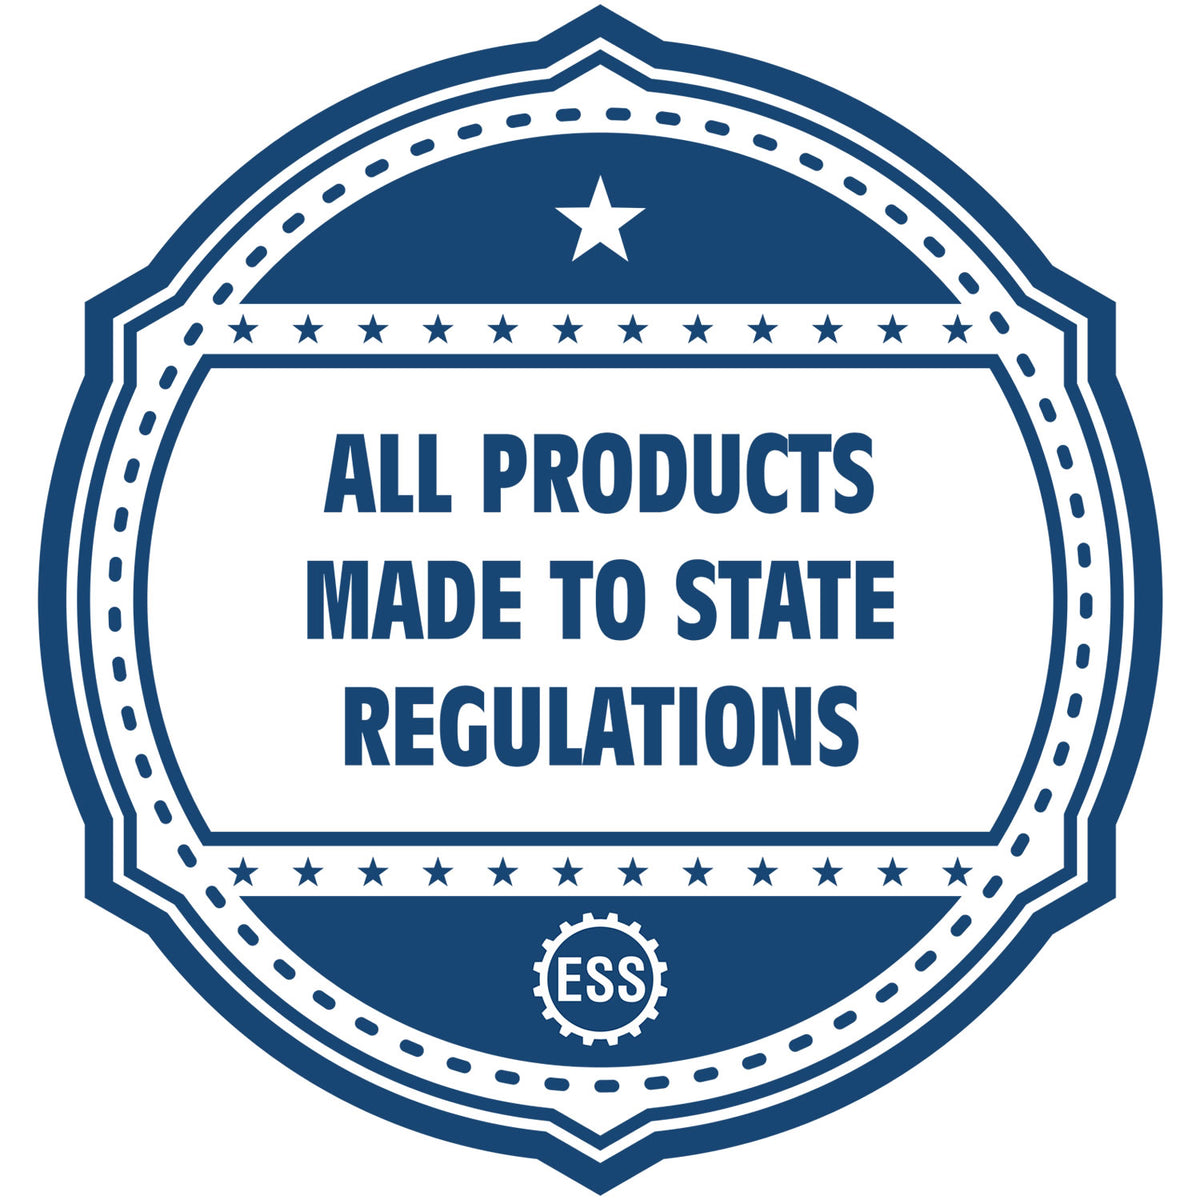 An icon or badge element for the Soft Pocket Nevada Landscape Architect Embosser showing that this product is made in compliance with state regulations.